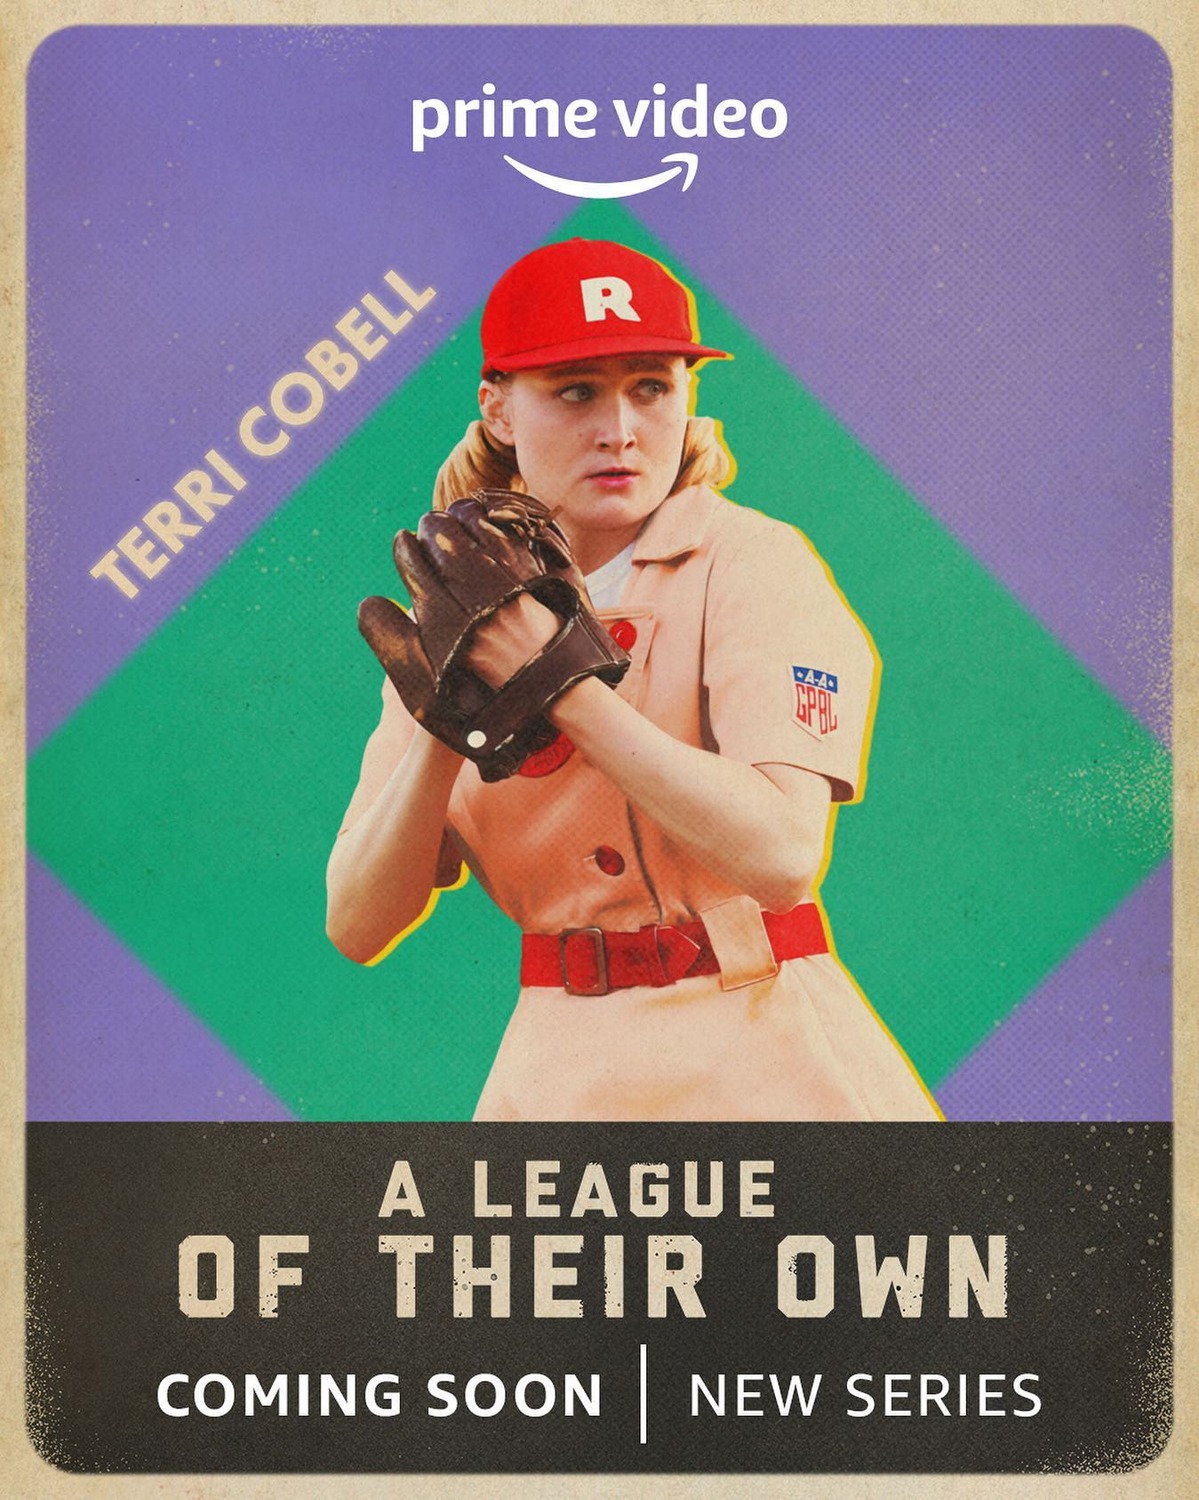 Extra Large TV Poster Image for A League of Their Own (#16 of 21)